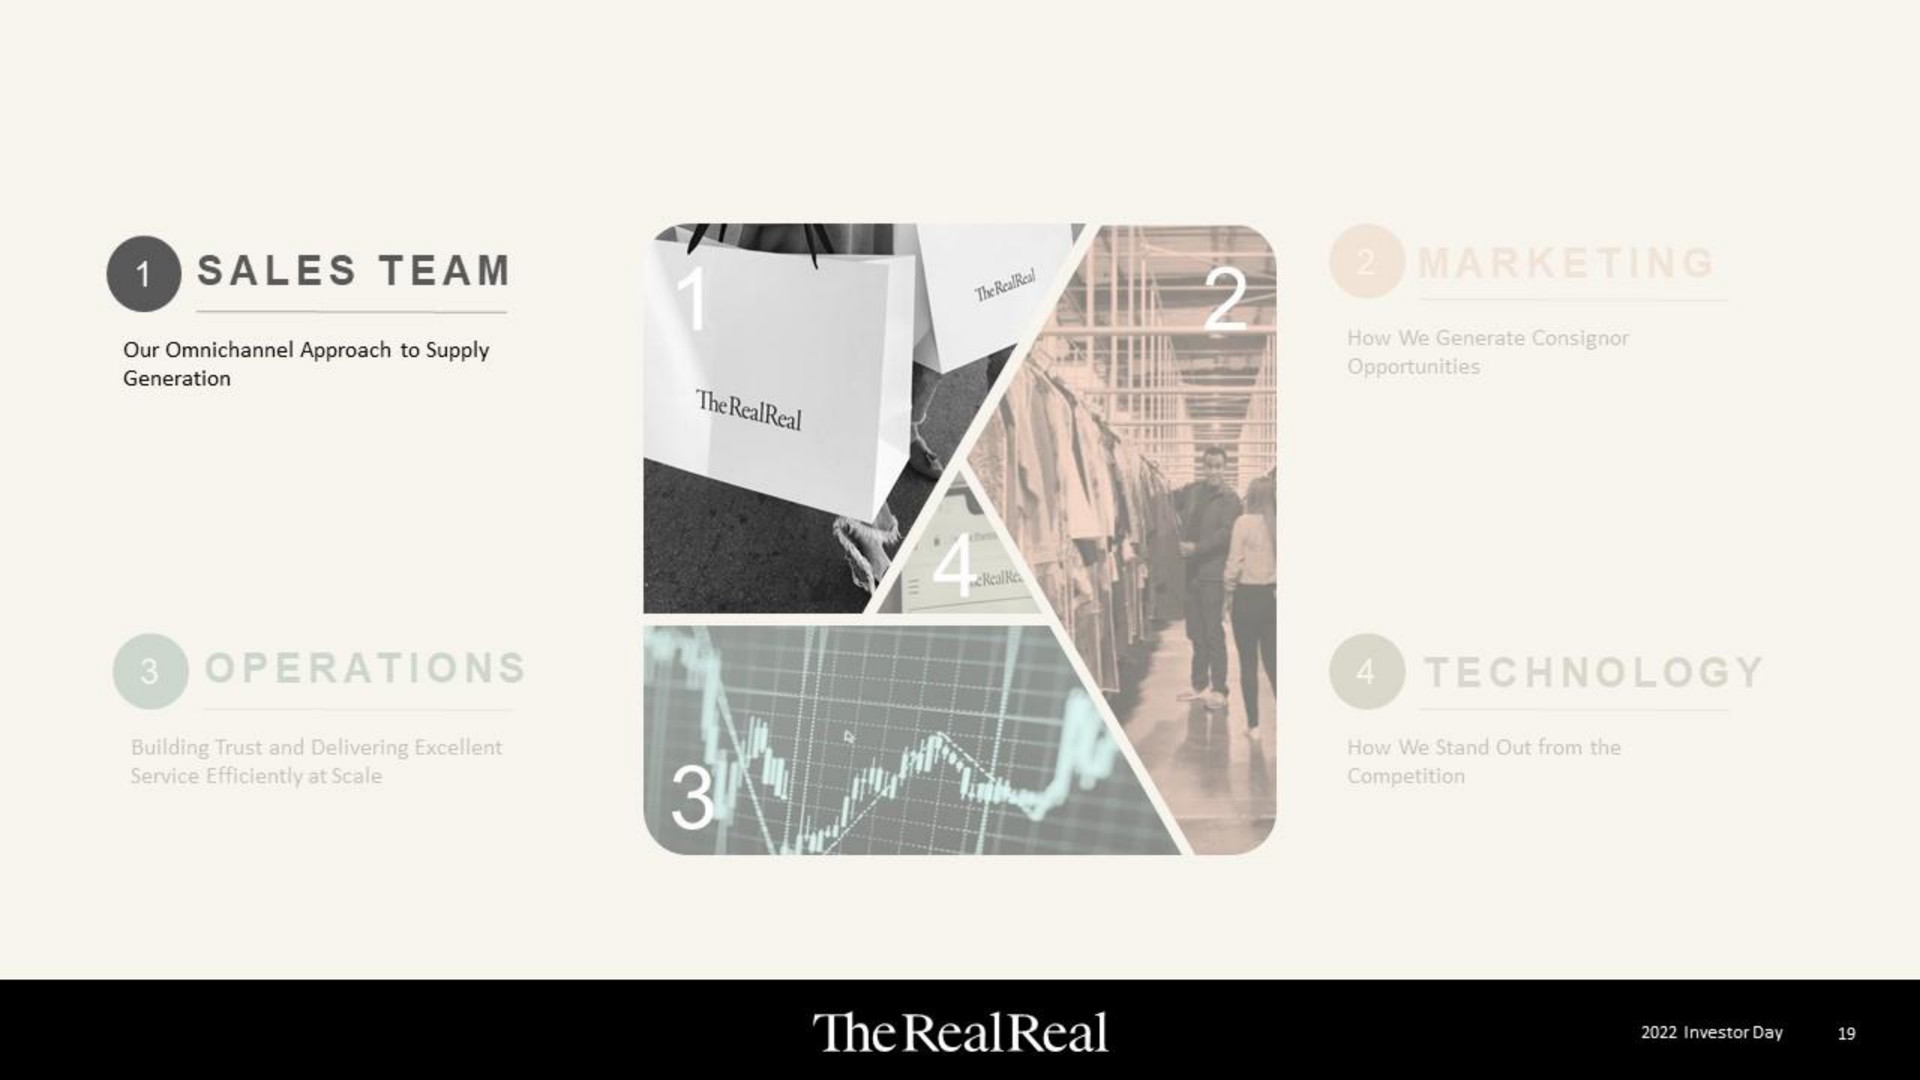 sates team | The RealReal